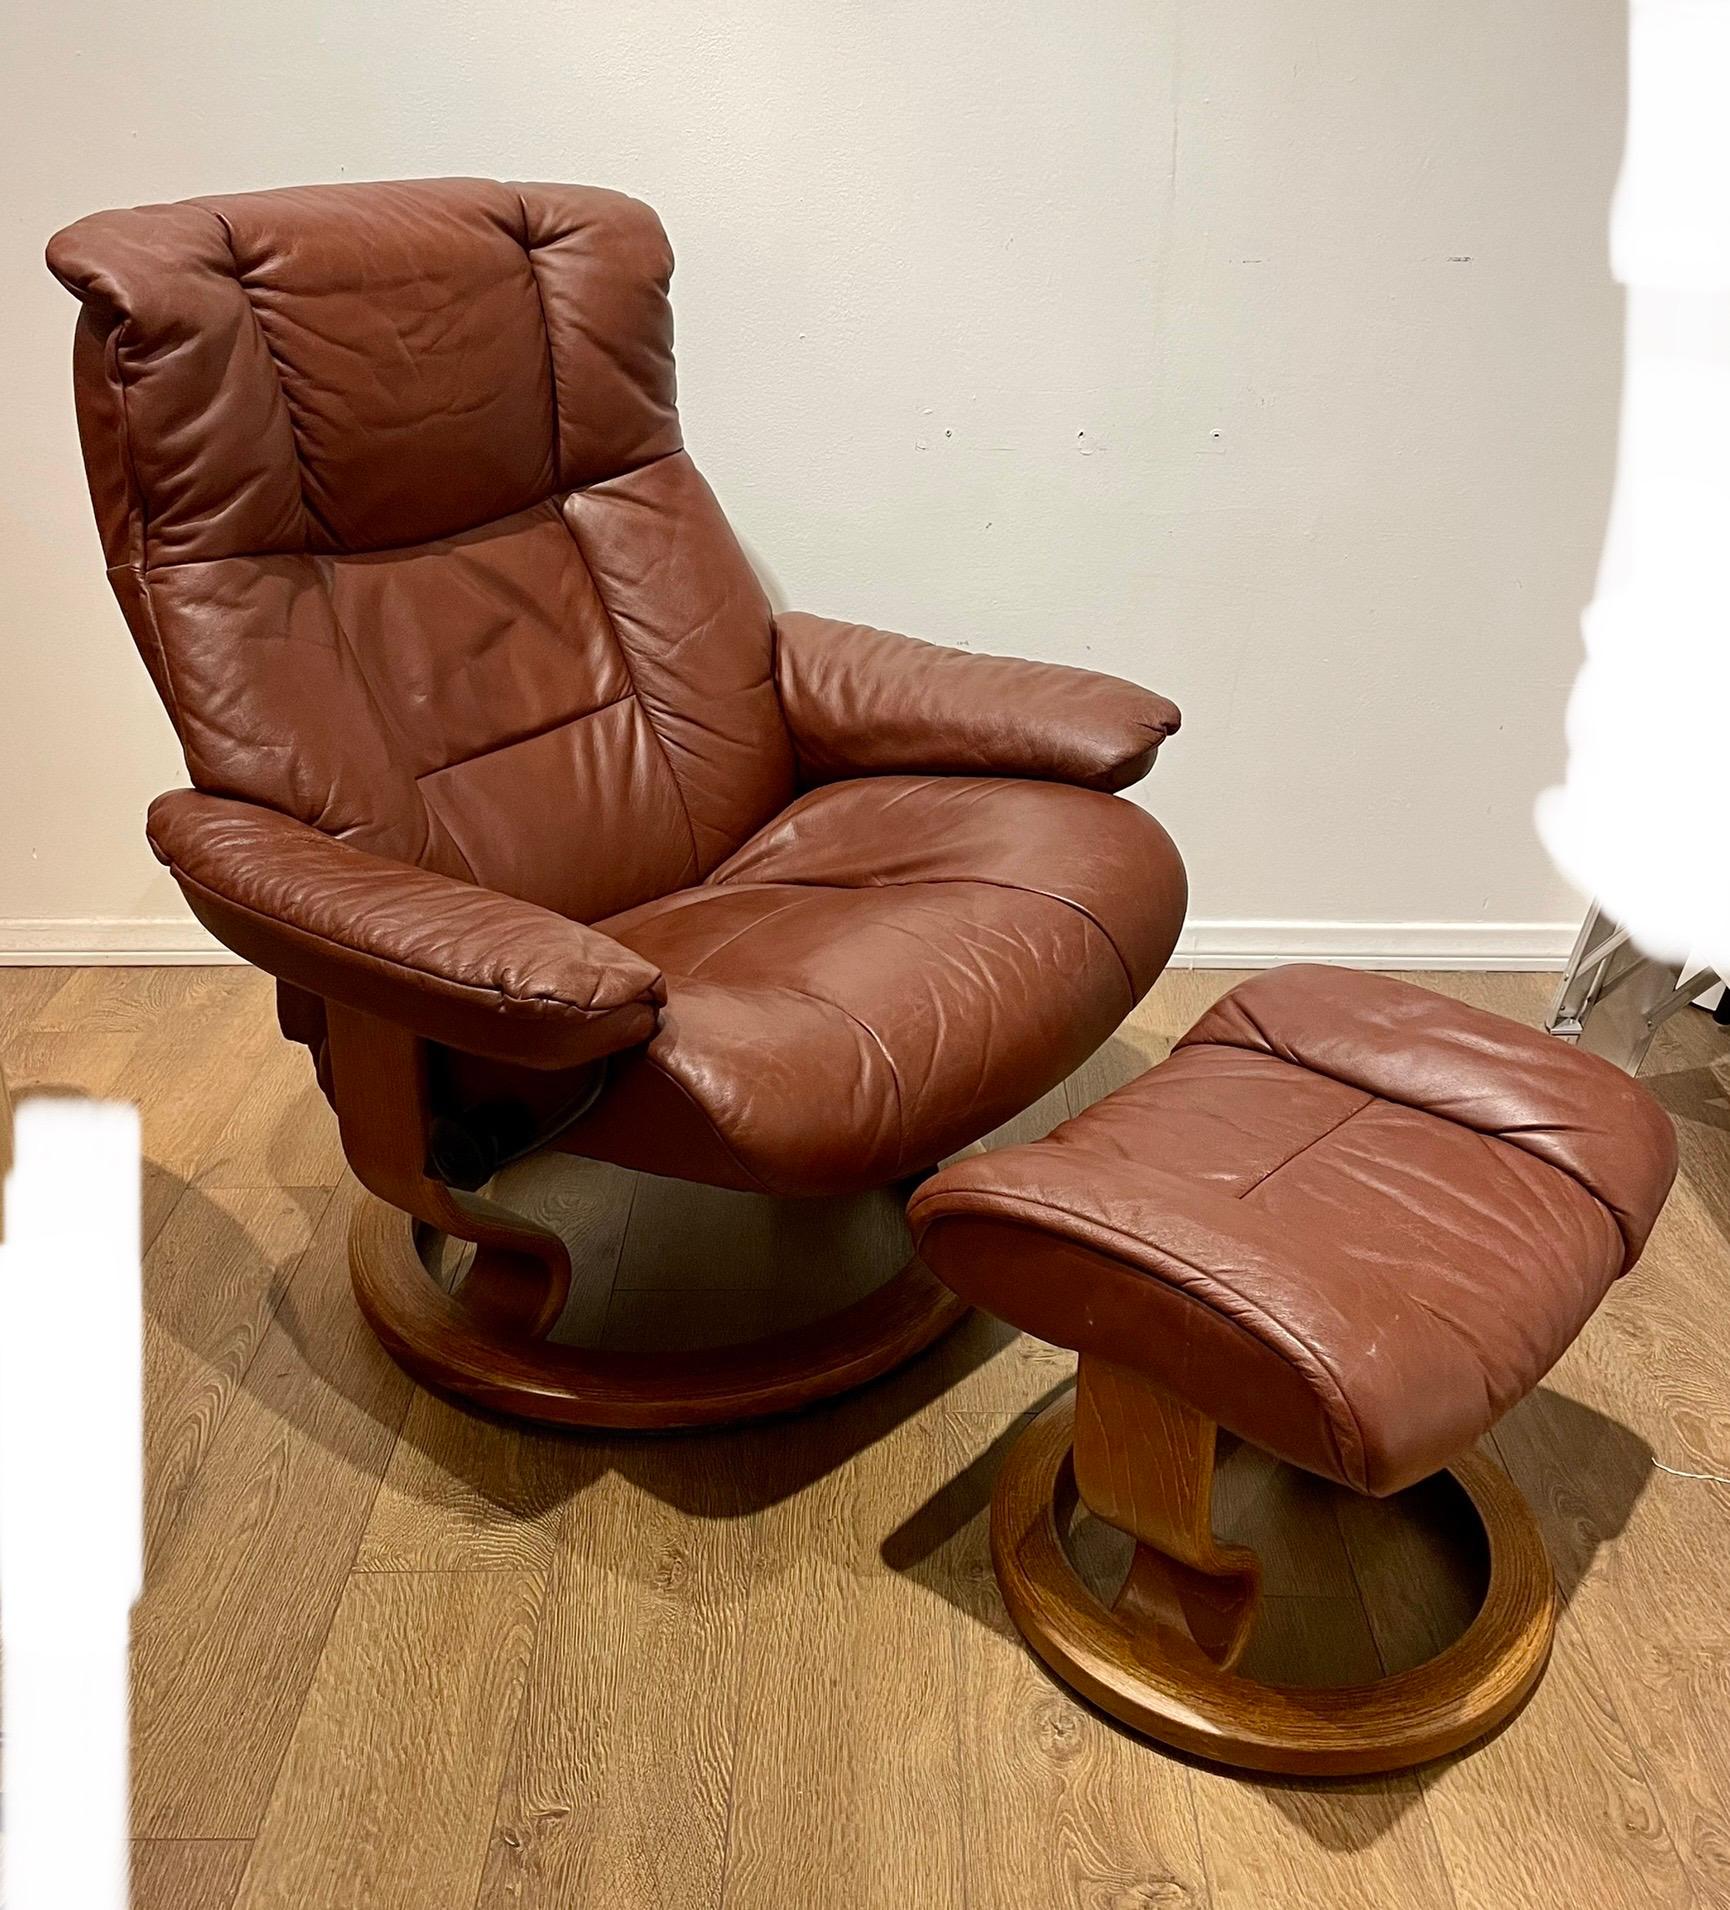 A vintage example of the modern classic reclining lounge chair and ottoman in maroon burgundy leather with a stained plywood base in walnut finish. Chair tilts and swivels. the nobs are marked with Ekornes mark.

Very good vintage and original